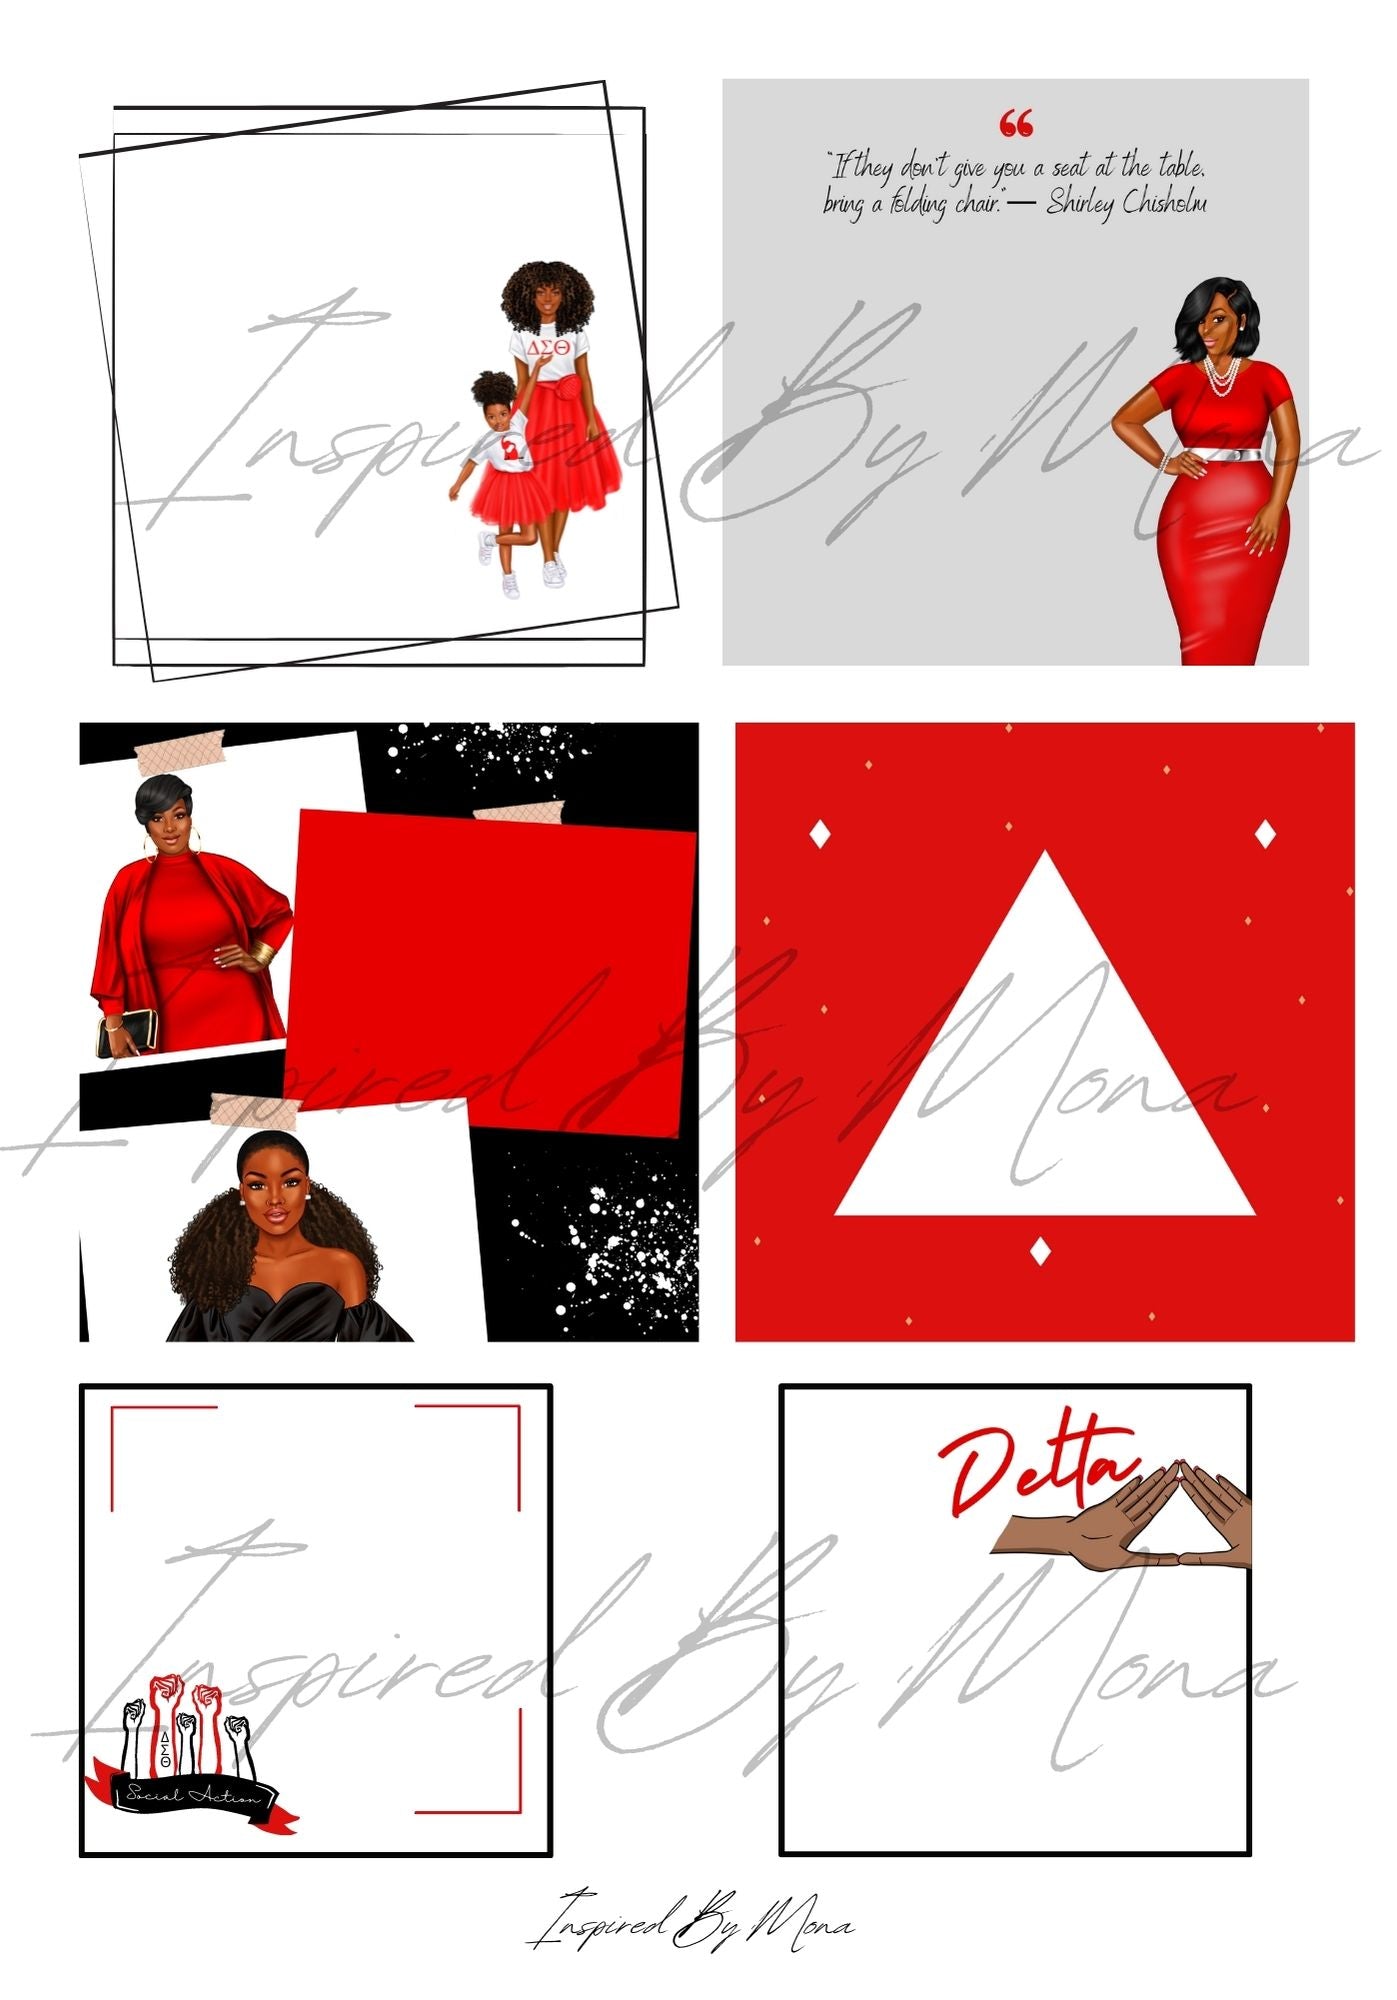 NEW DST Stickers Pack (10 Sheets) - Delta Sigma Theta Stickers Sheet